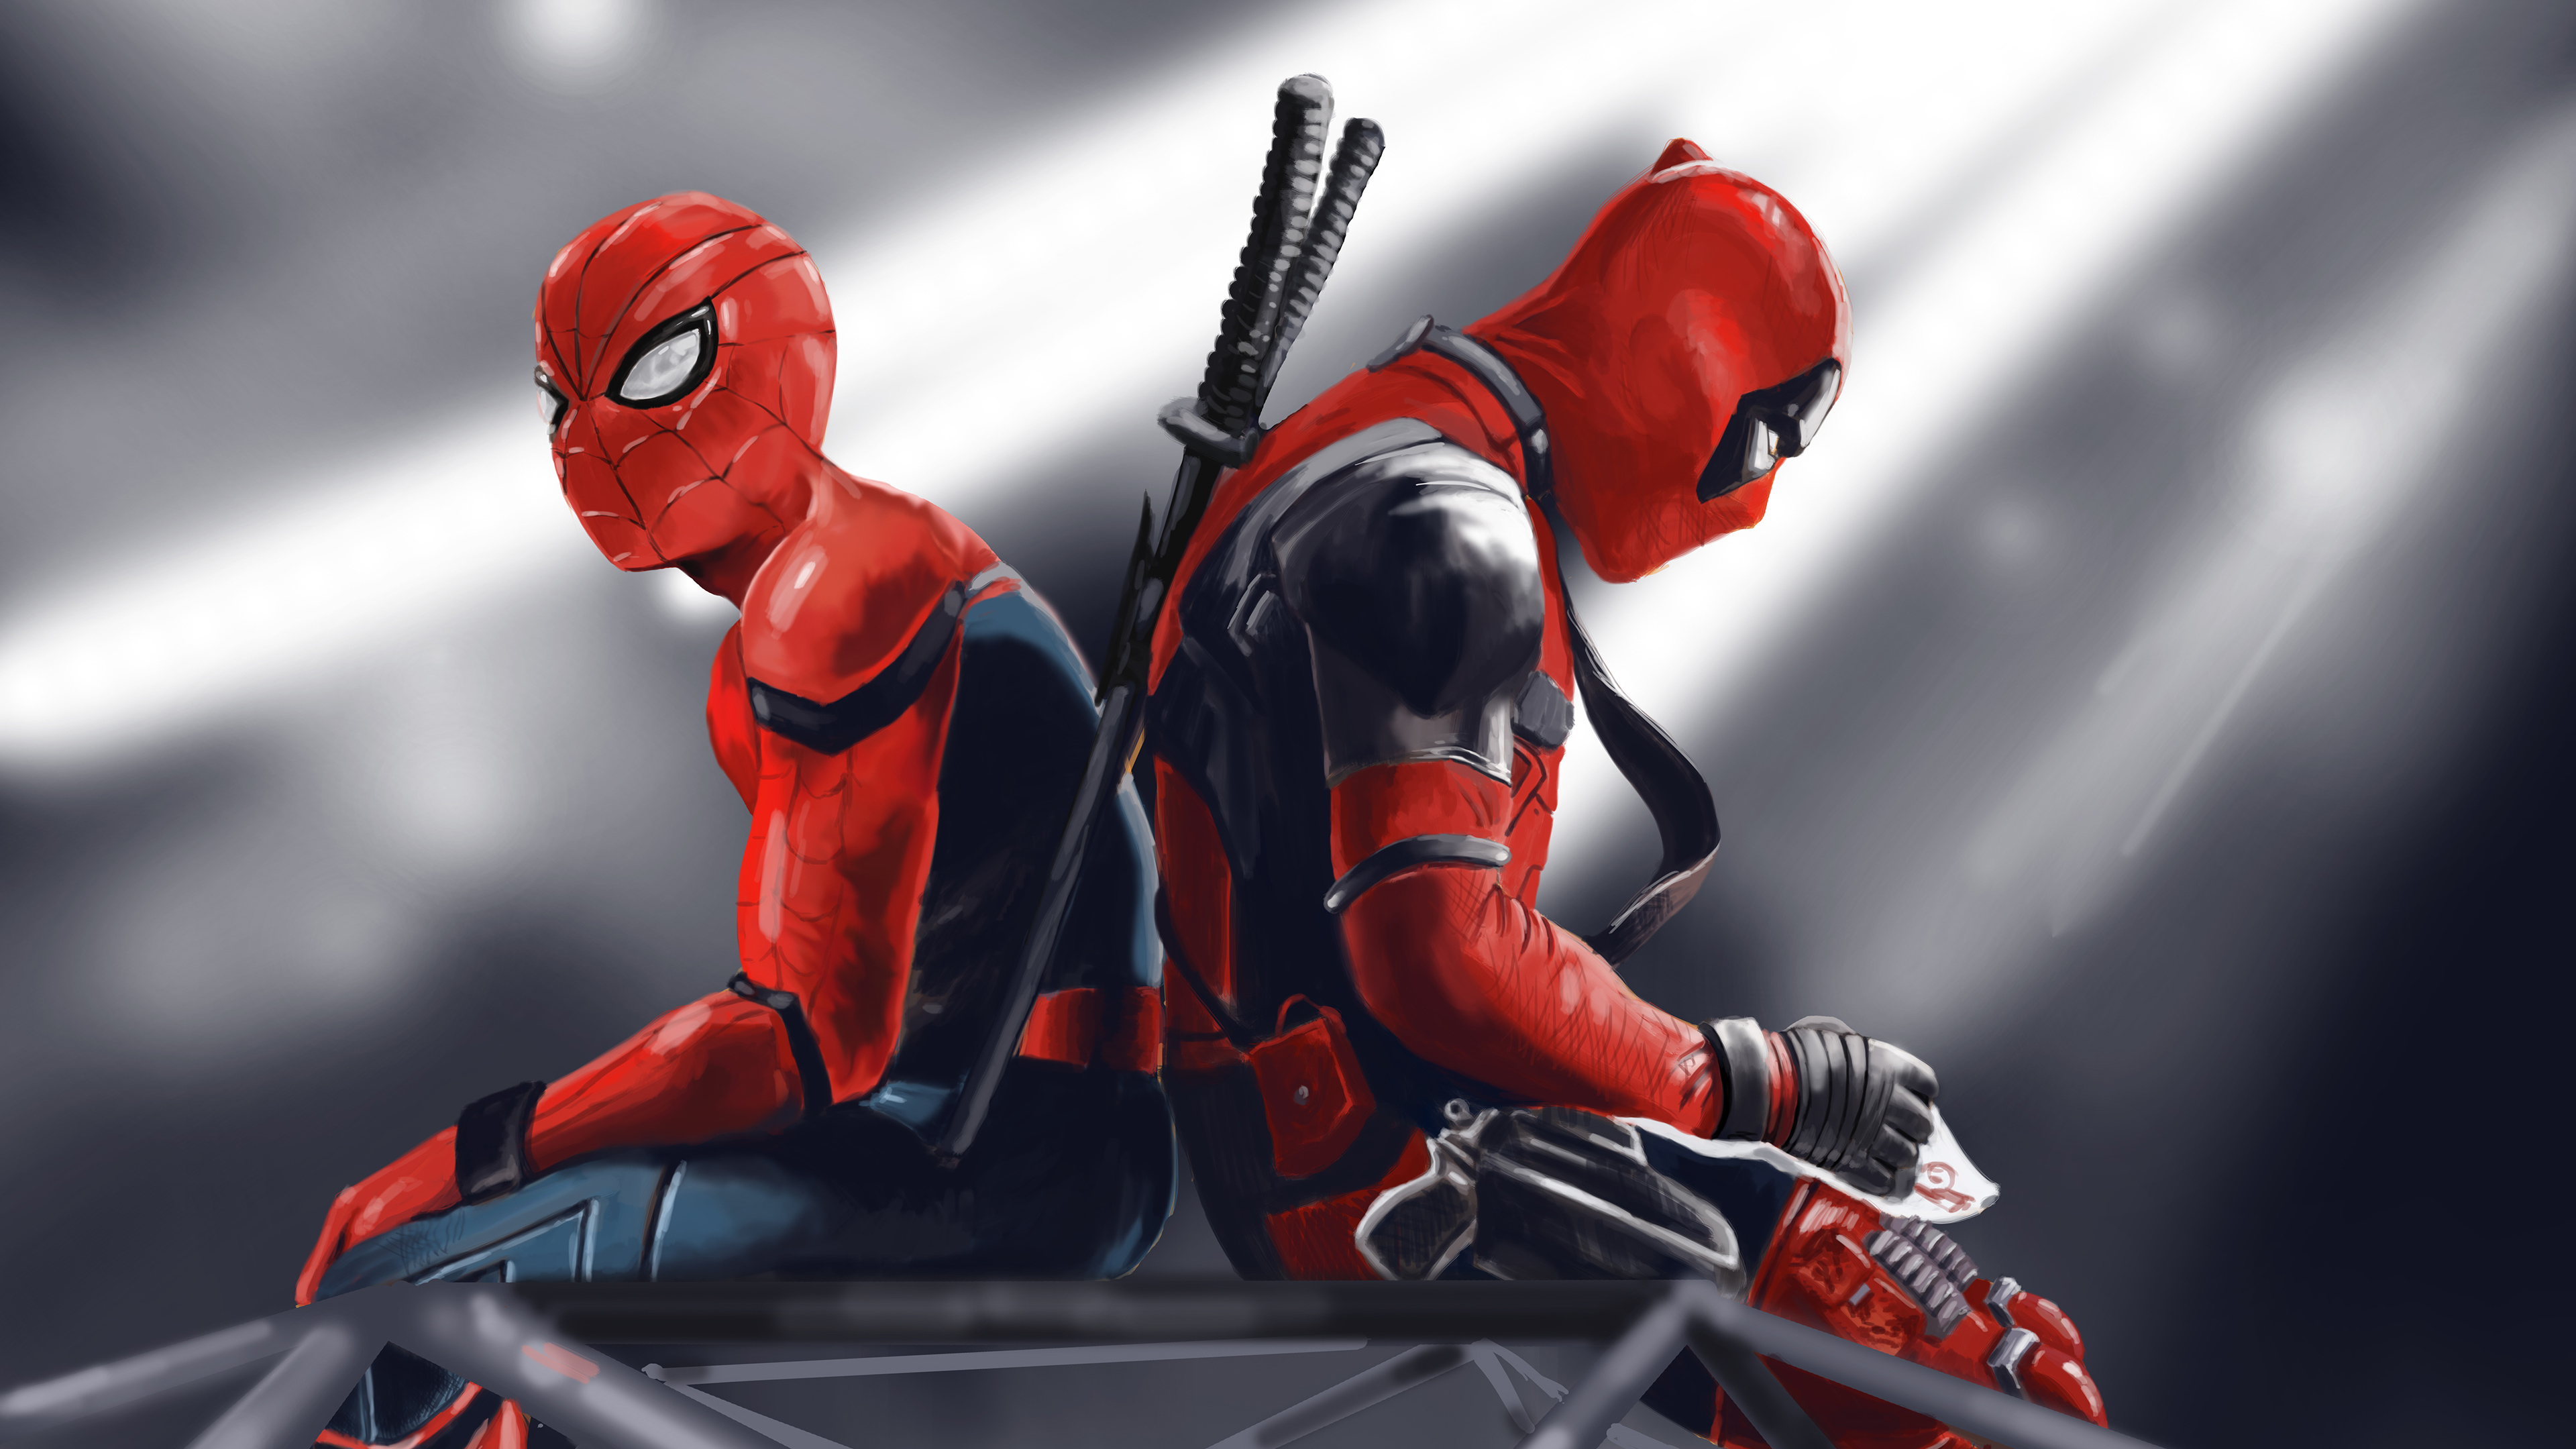 1024x768 Spidey And Deadpool 1024x768